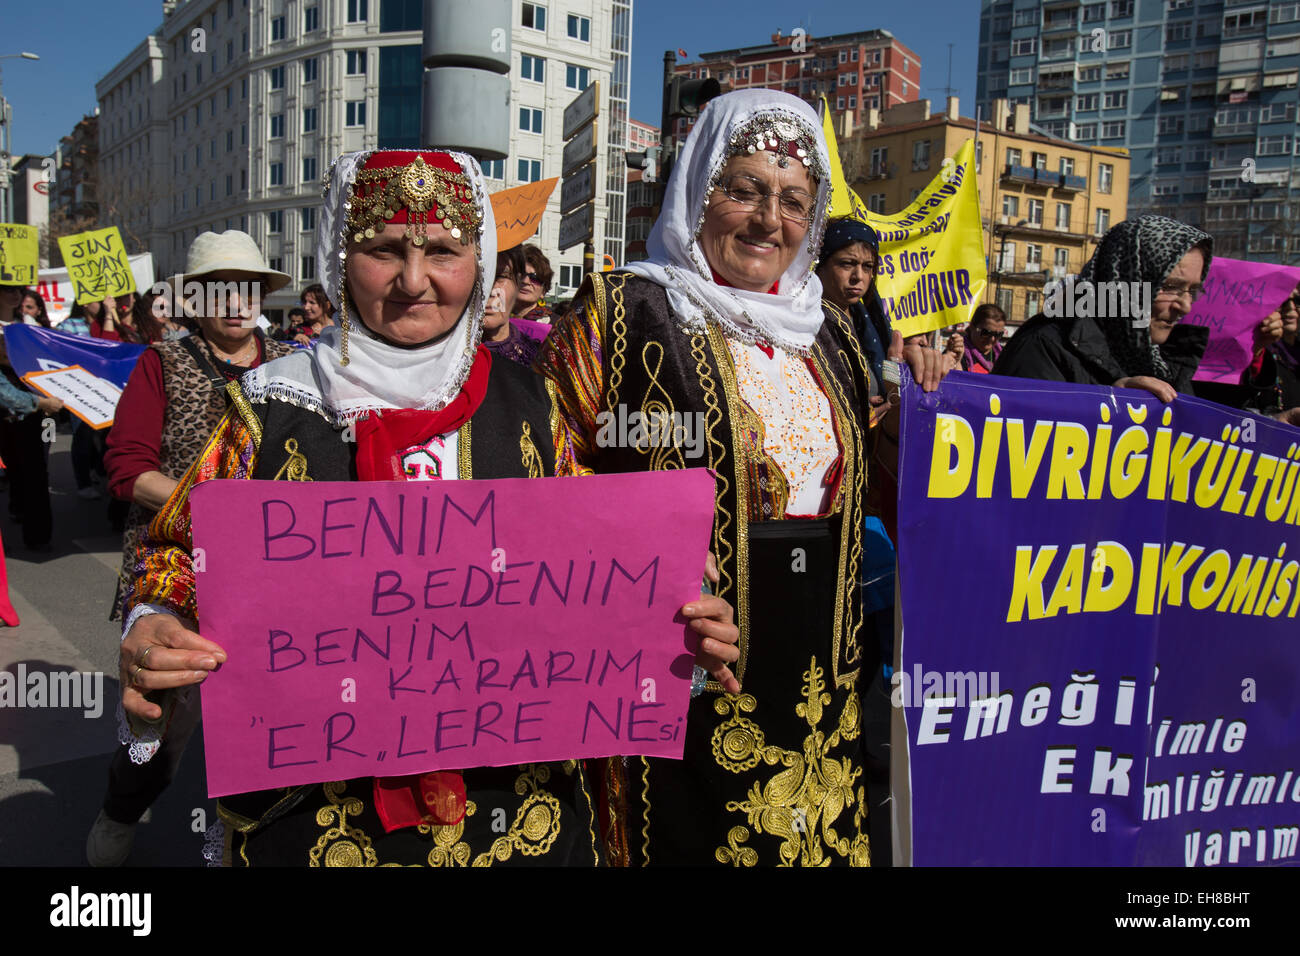 Women in traditional Alevi costume hold a placard reading “My body, my decision” during a demonstration on International Women's Day. Alevis are a large religious minority in Turkey, often considered an offshoot of Shia. © Piero Castellano/Pacific Press/Alamy Live News Stock Photo